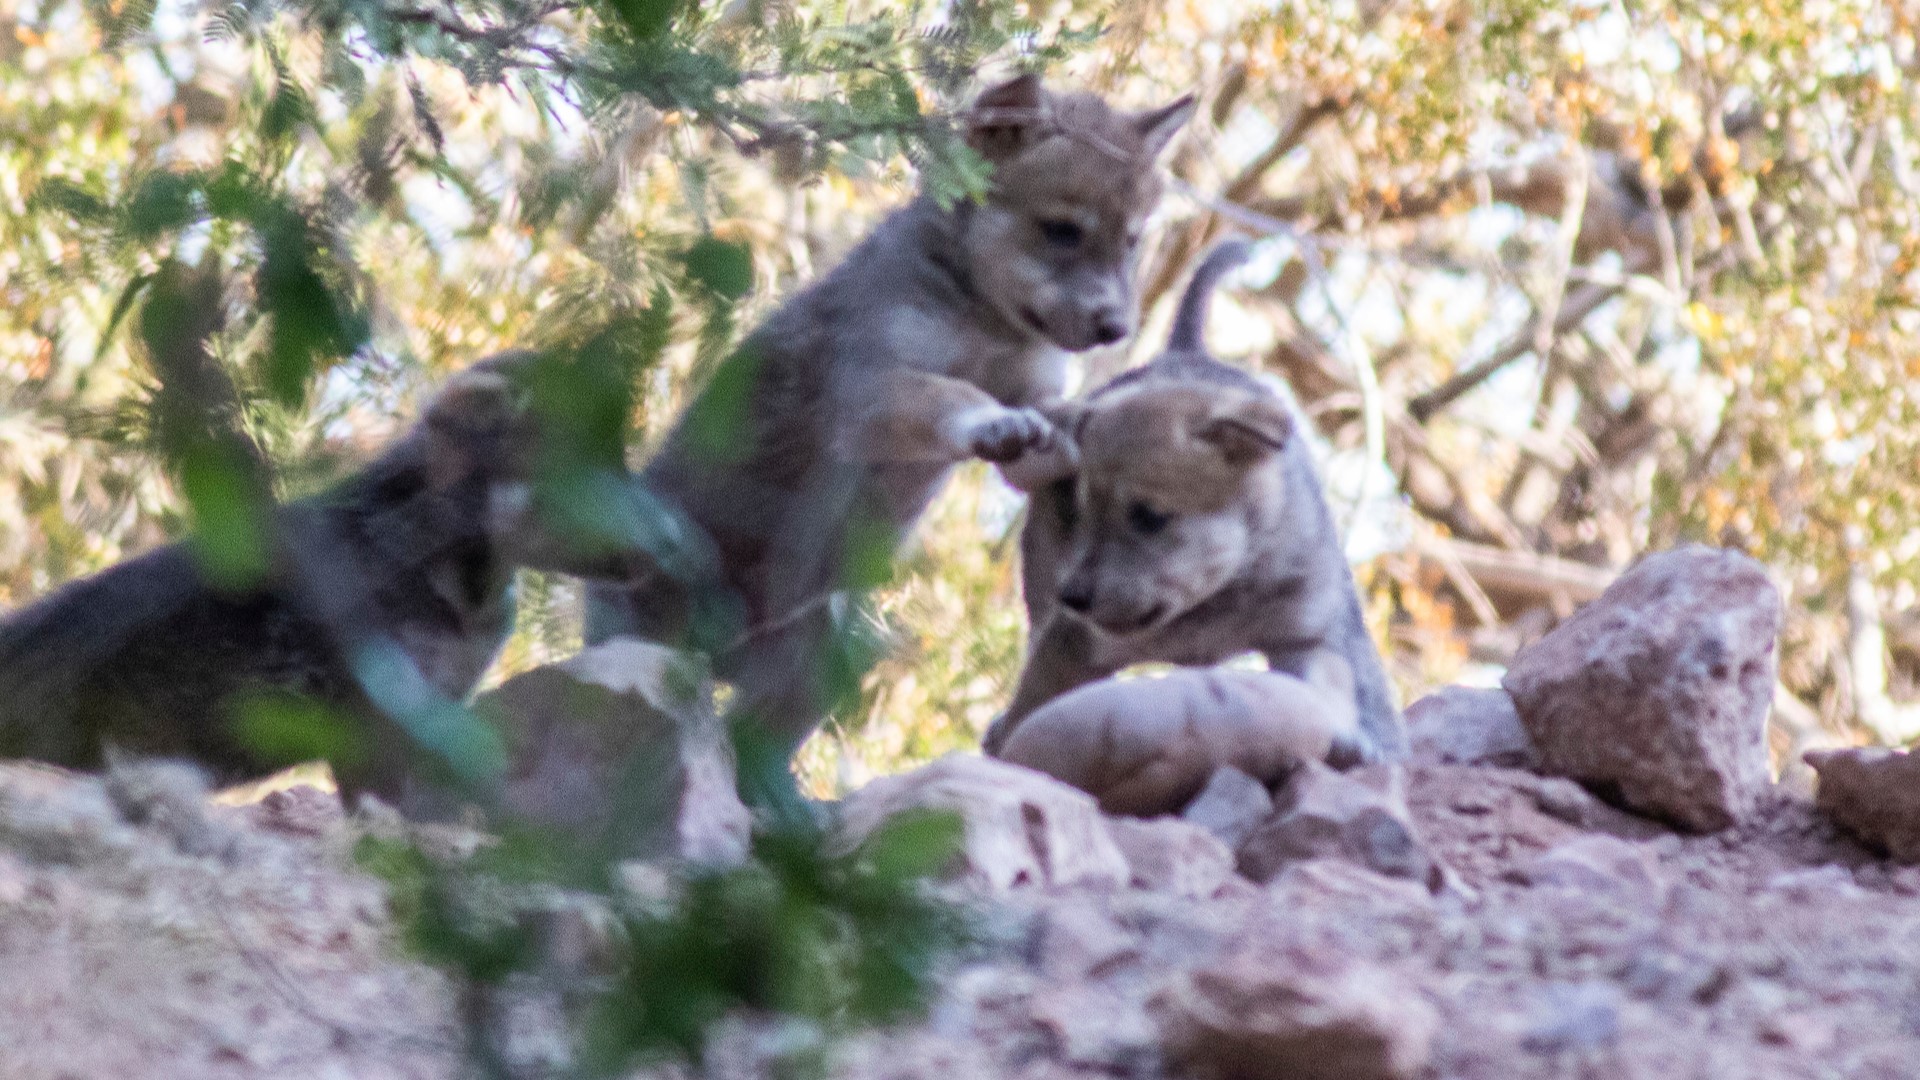 Six Mexican Gray Wolf pups were born at the Phoenix Zoo in early May. Video shows the six pups playing together early Tuesday morning with mom and dad making an appearance. The Phoenix Zoo is taken part in a conservation plan to save the Mexican Gray Wolf population, and it's very excited to introduce the six pups to the public.